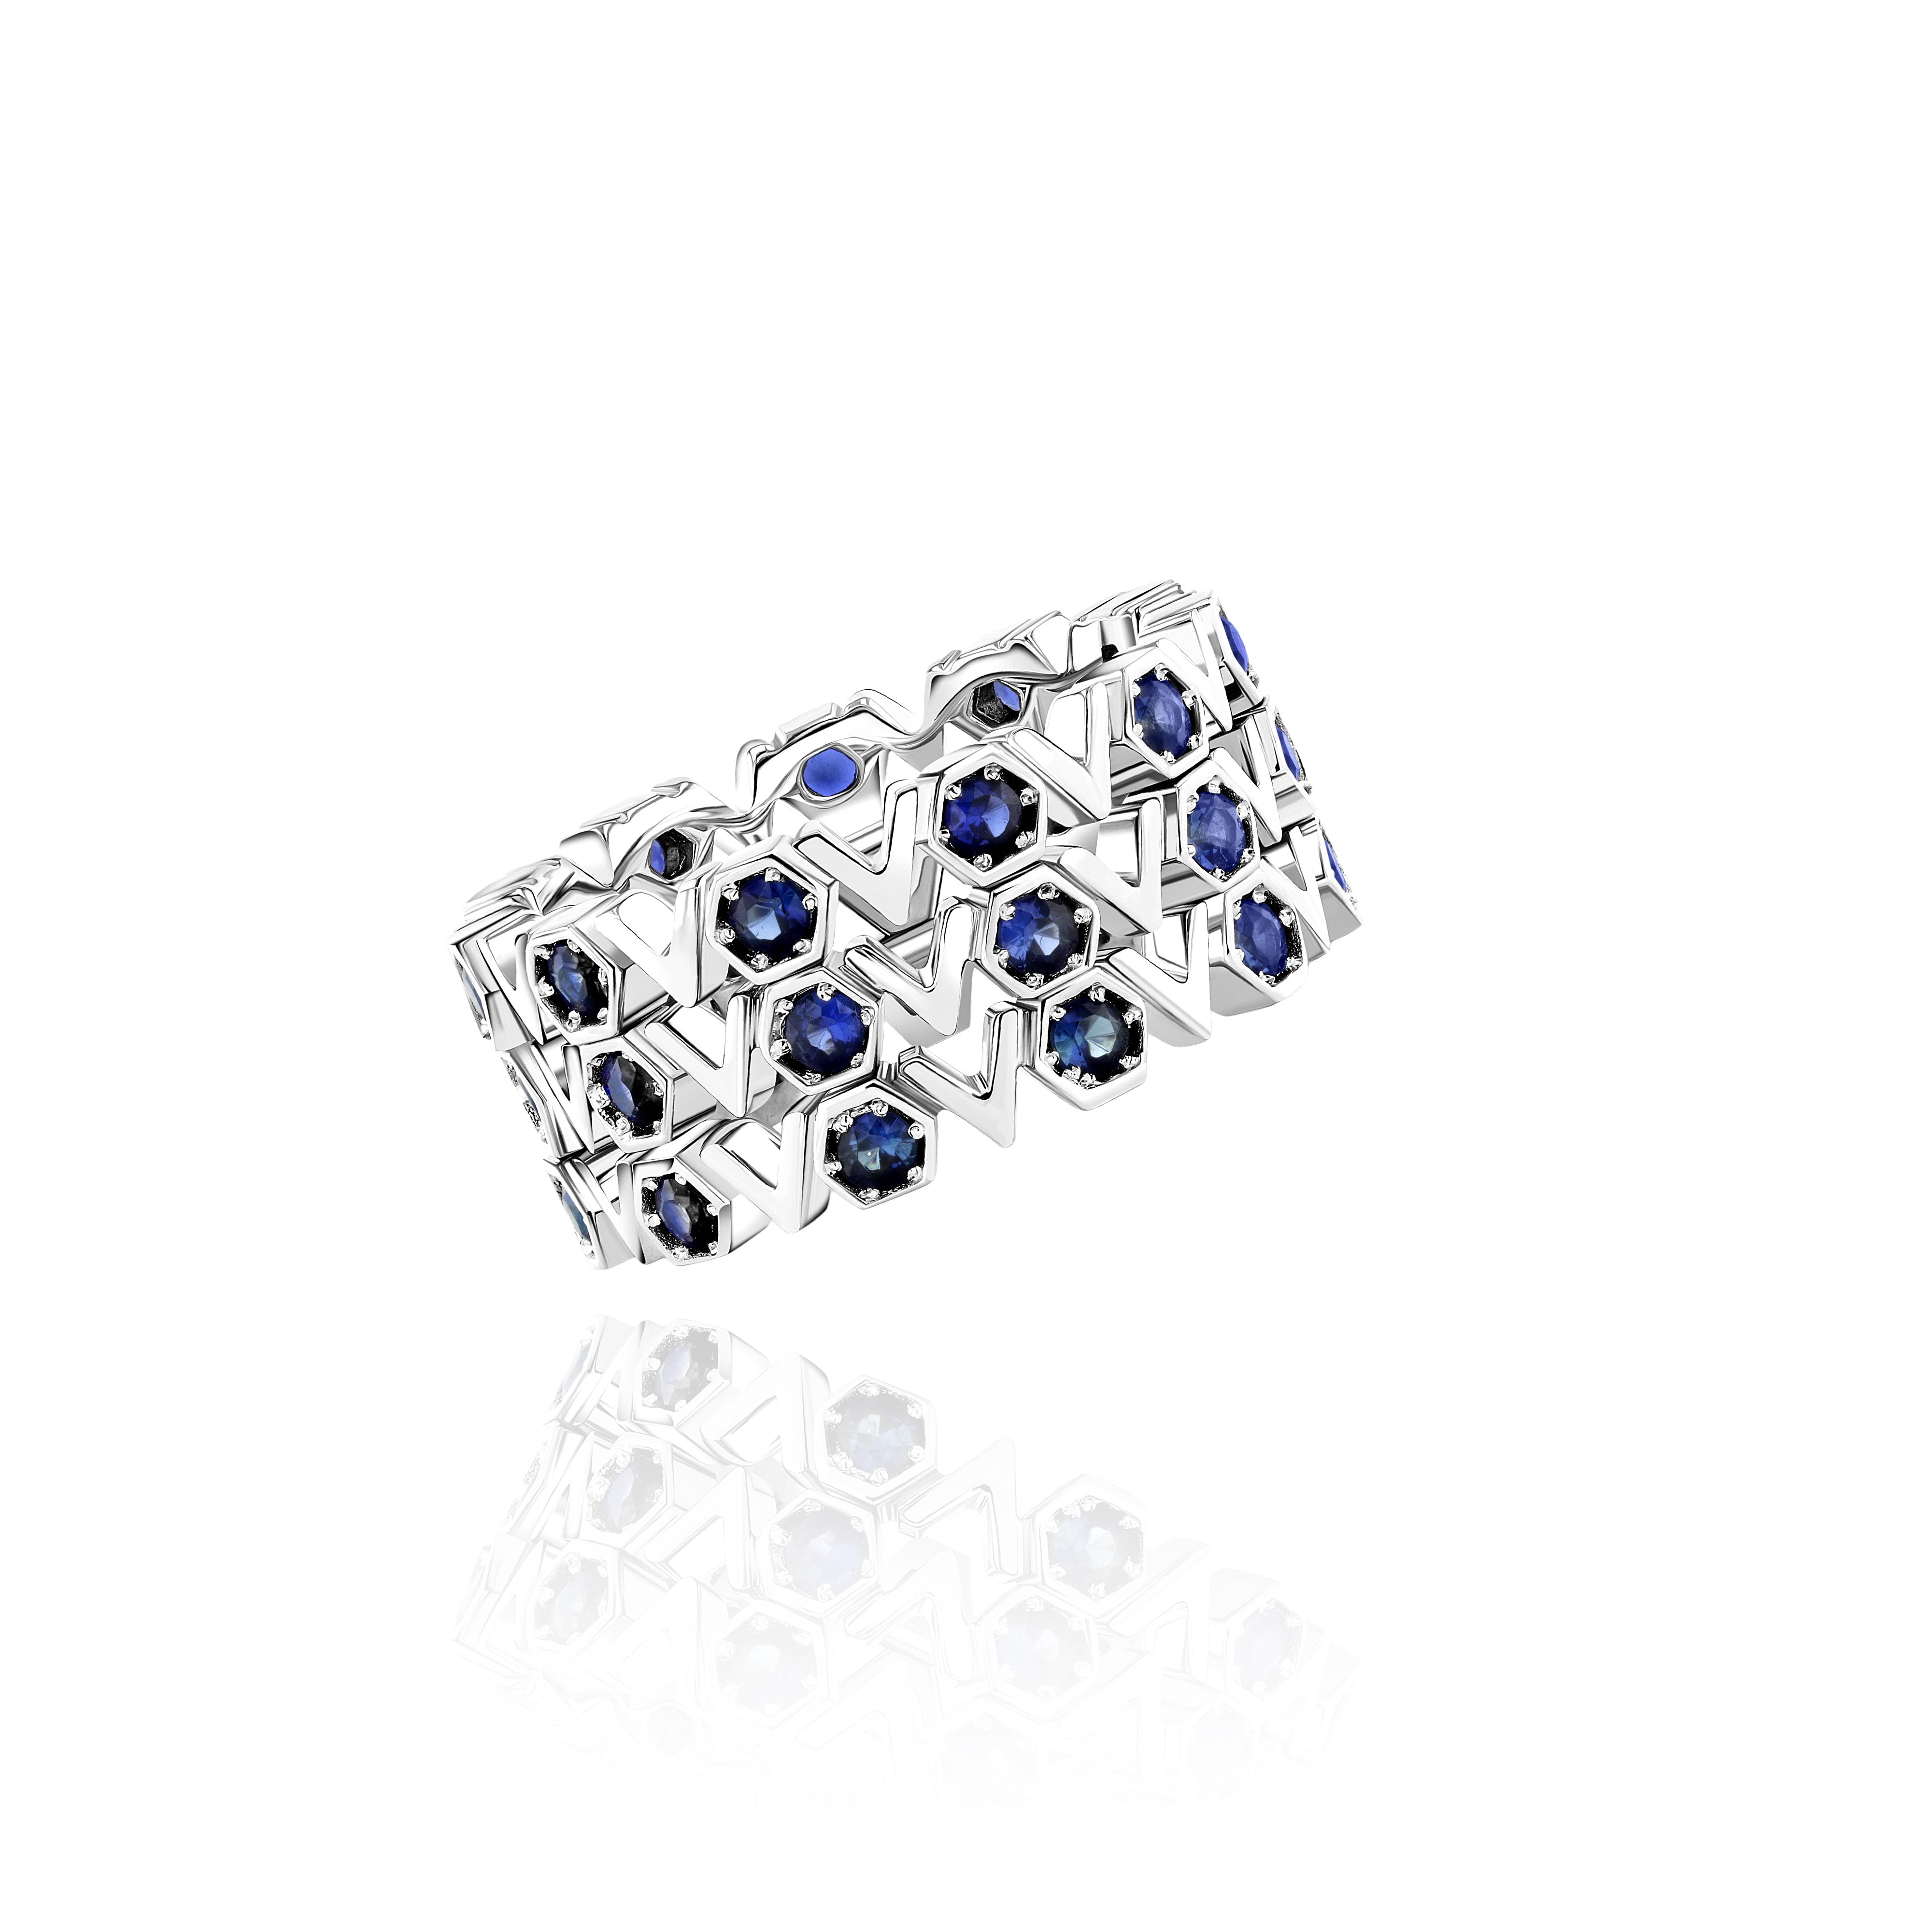 Stack of three White Gold and Blue Sapphire Rings with octagons and V shapes, Medium